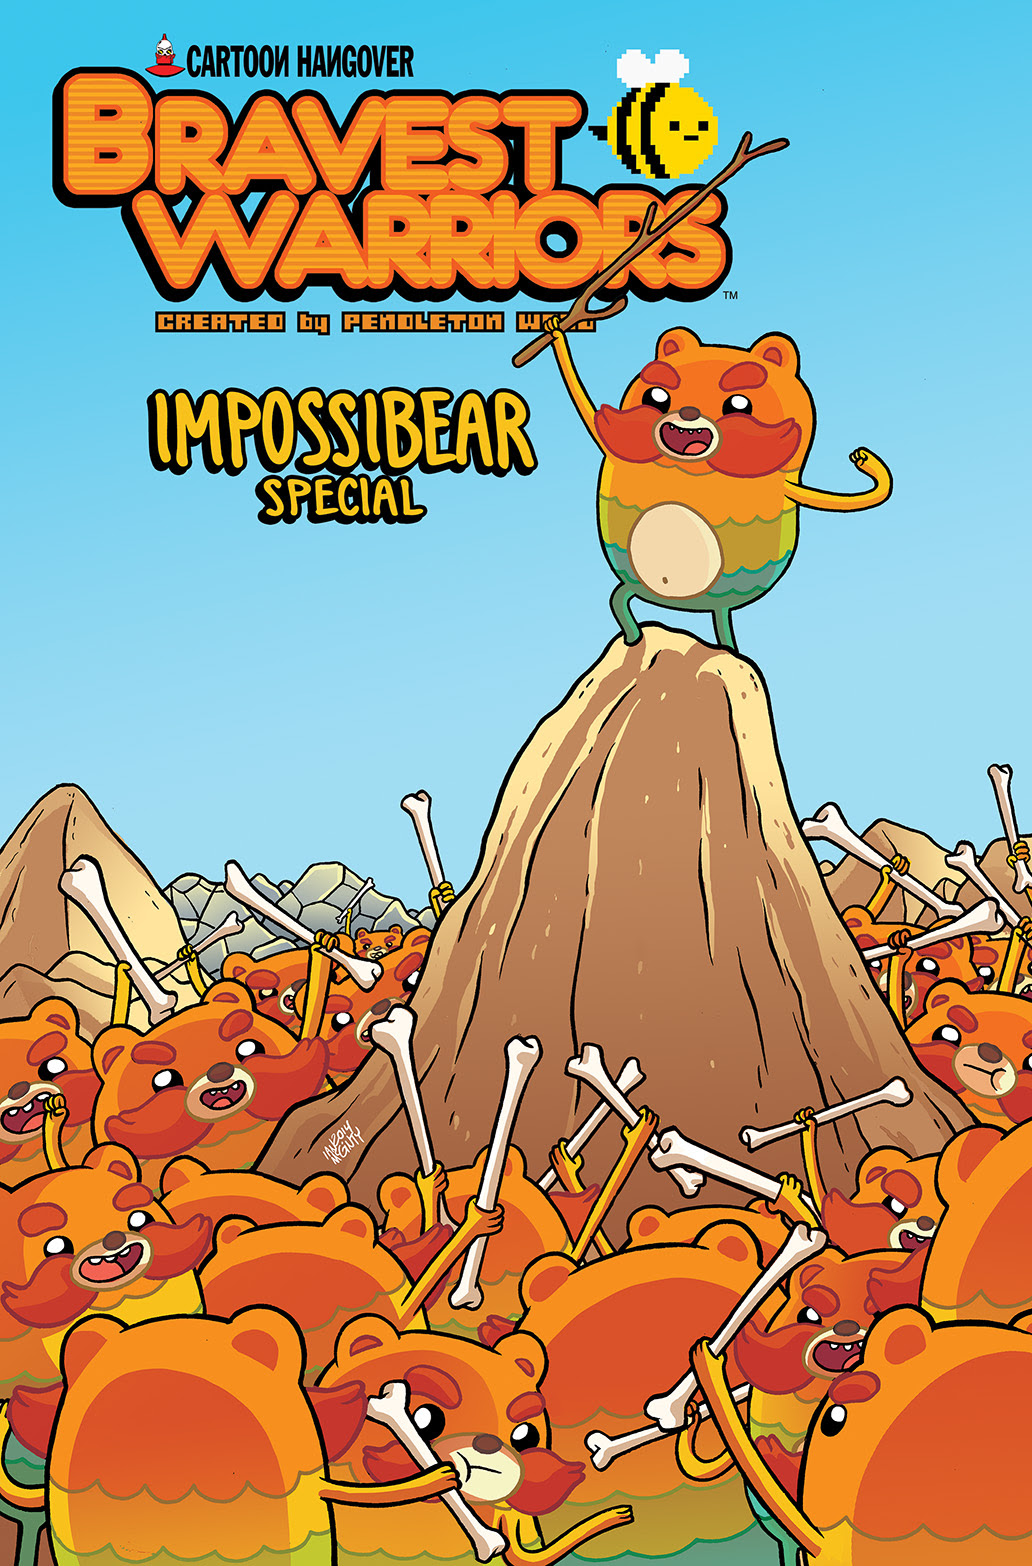 BRAVEST WARRIORS 2014 IMPOSSIBEAR SPECIAL #1 Cover A by Ian McGinty